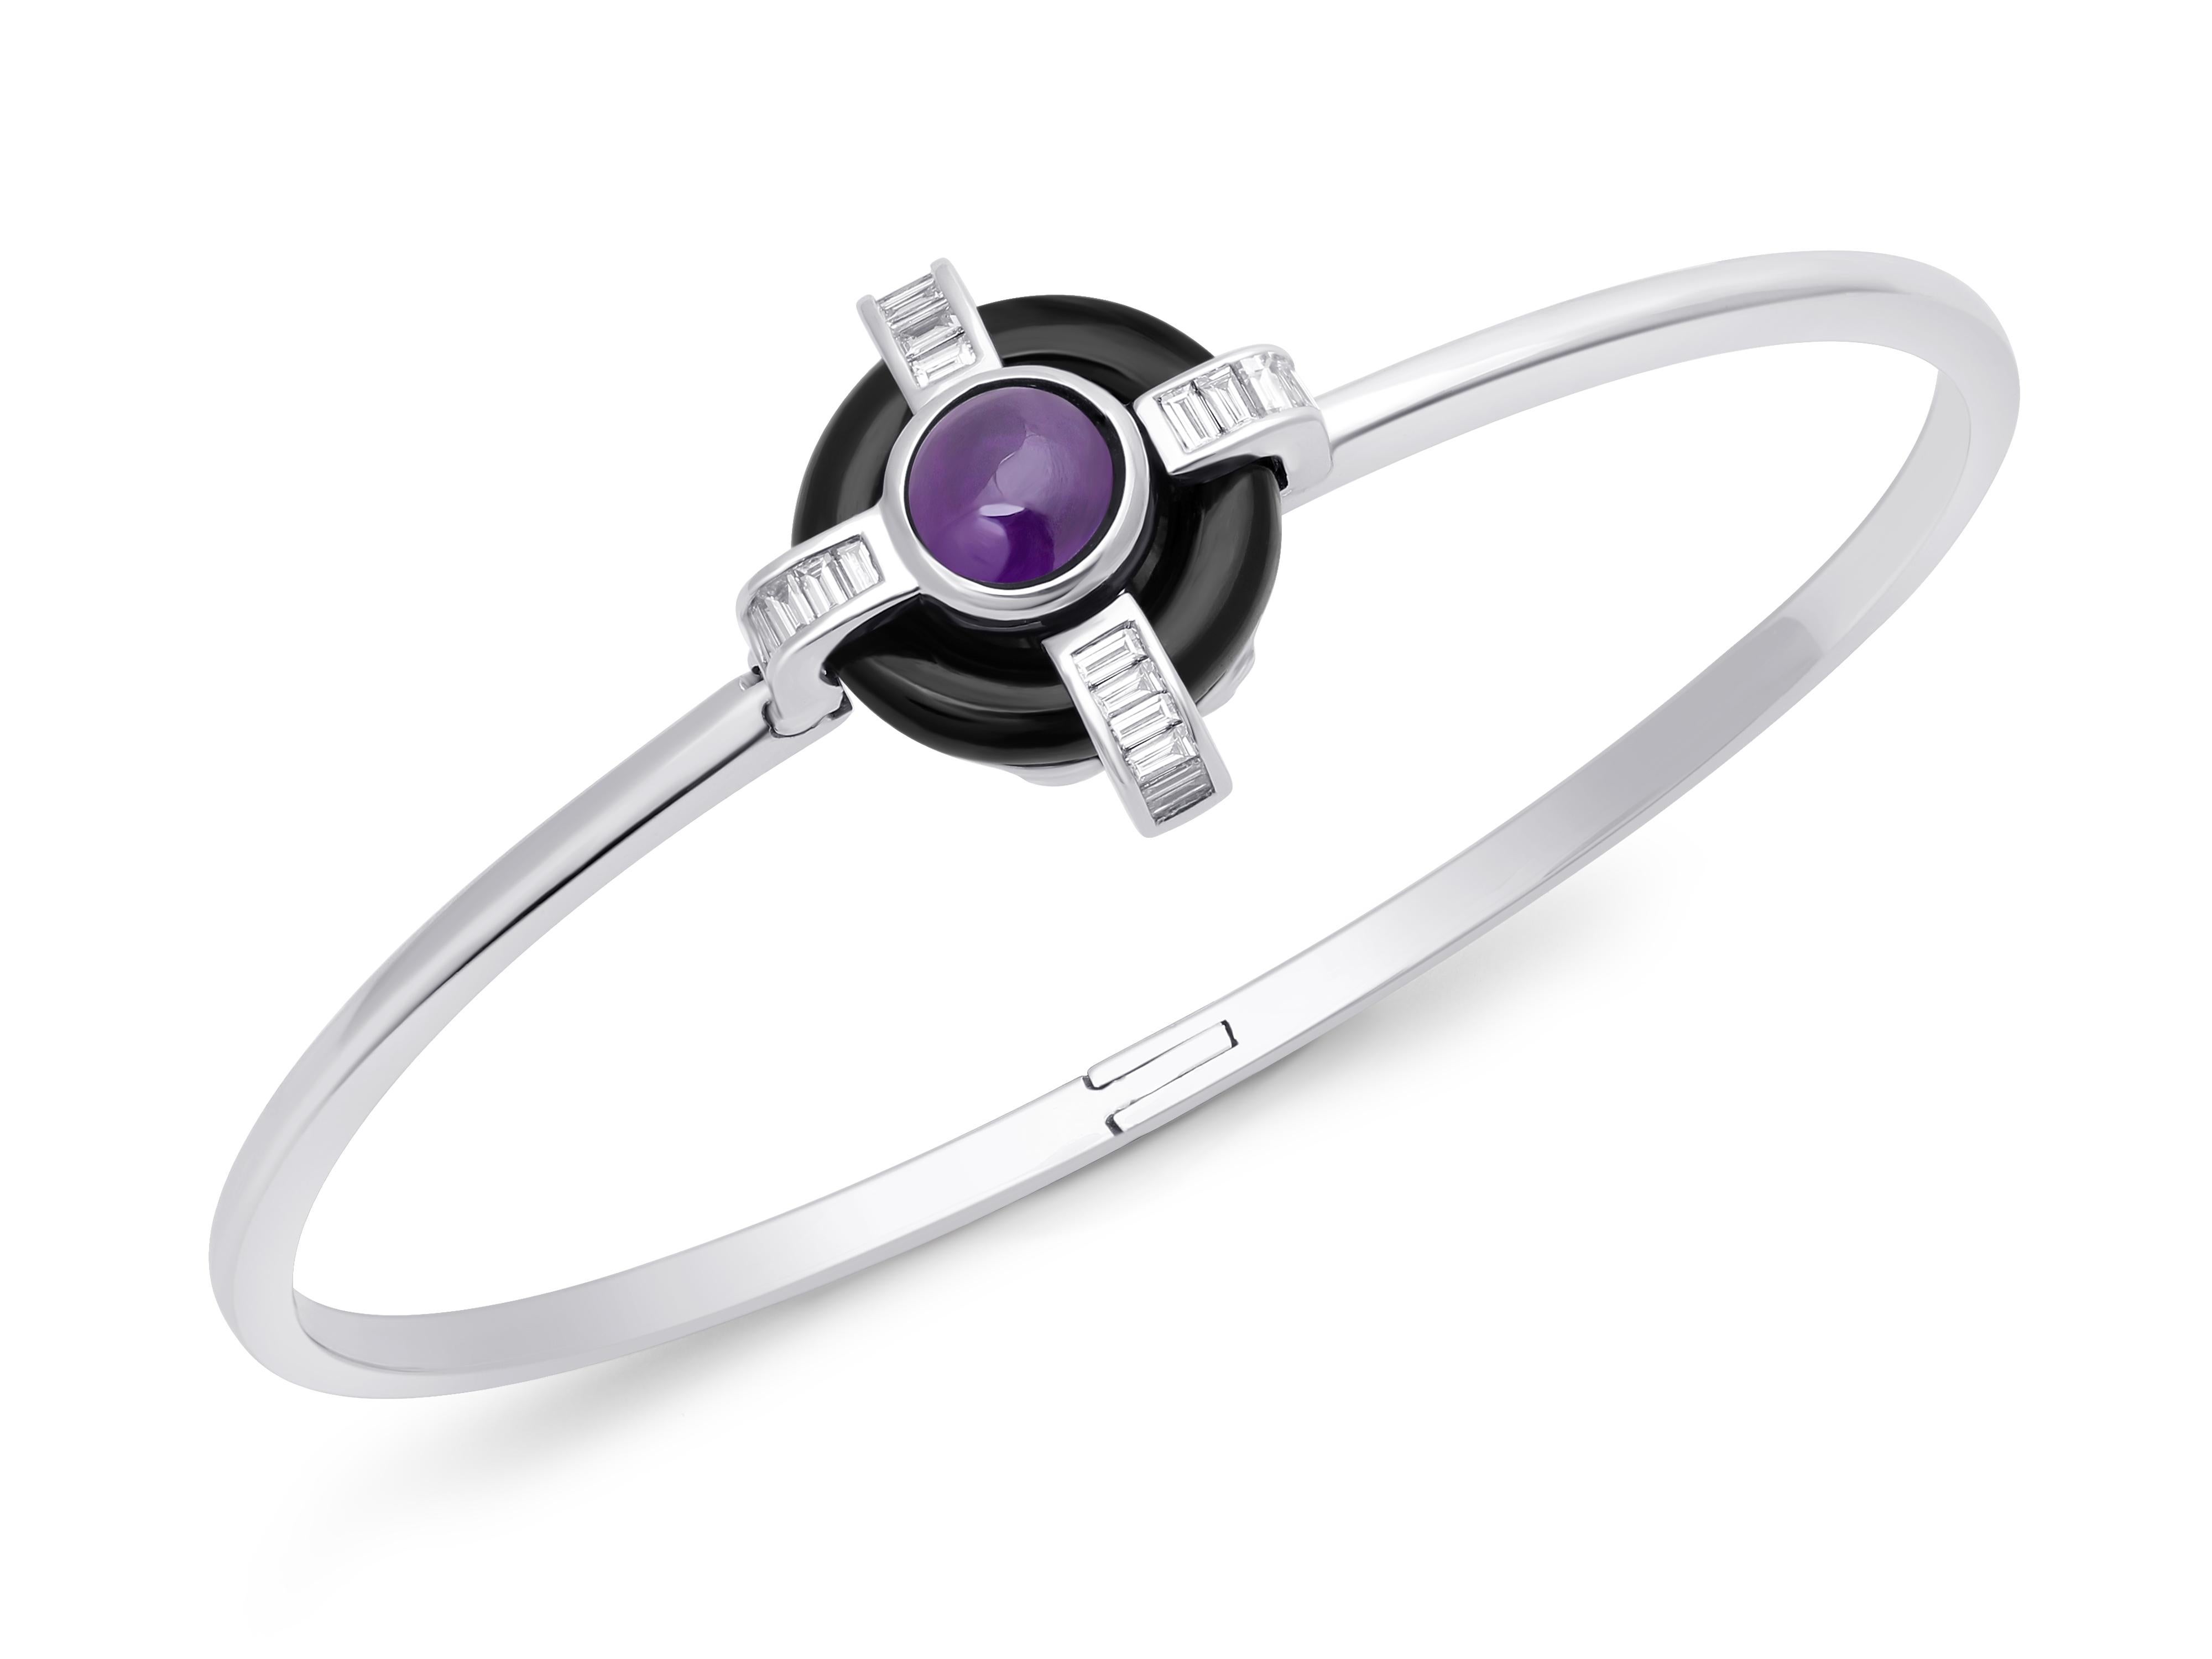 Contrasting colours and a mix of clean lines and smooth curves merge to create the distinctive look of Atelo’s Deco Wheel Collection.

This deco-inspired bangle combines black onyx, baguette (rectangular) diamonds and amethyst to create a striking